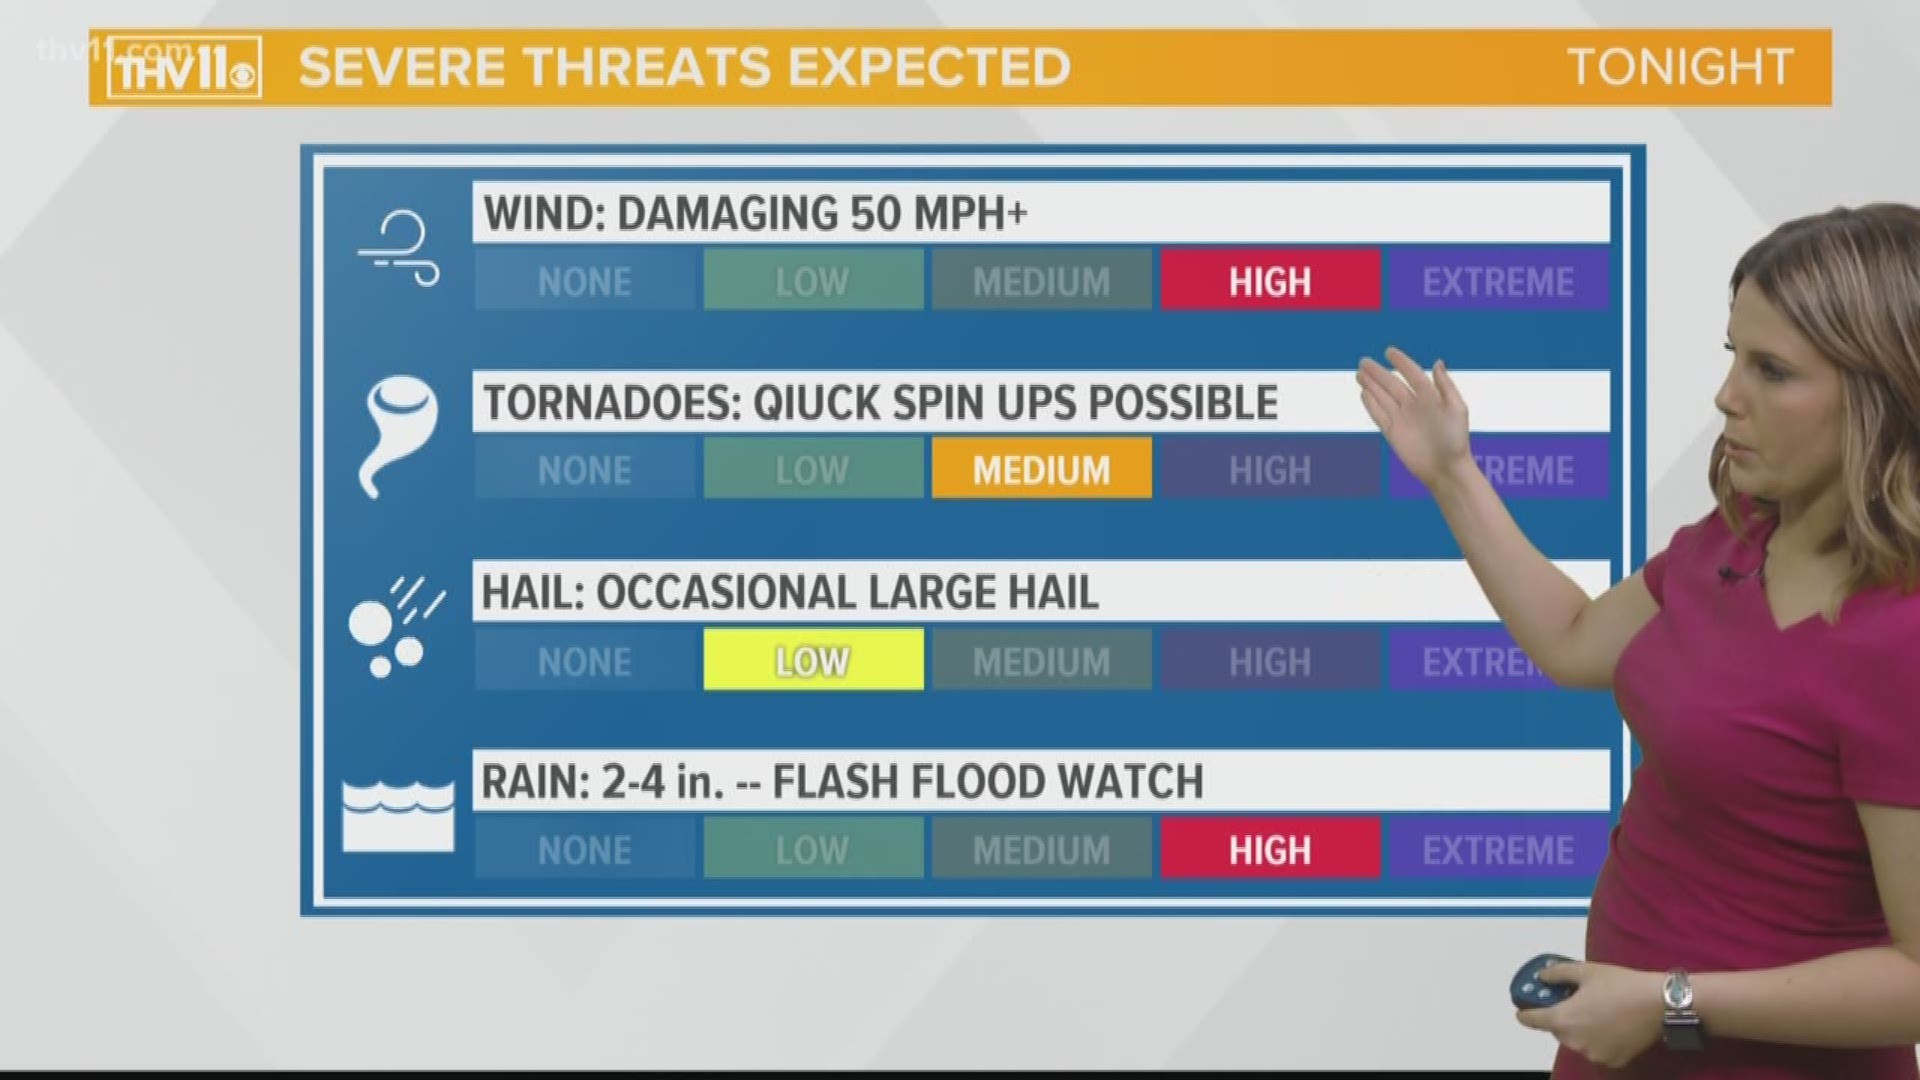 Sarah Fortner delivers the latest forecast for severe weather that is going to impact most of central Arkansas.